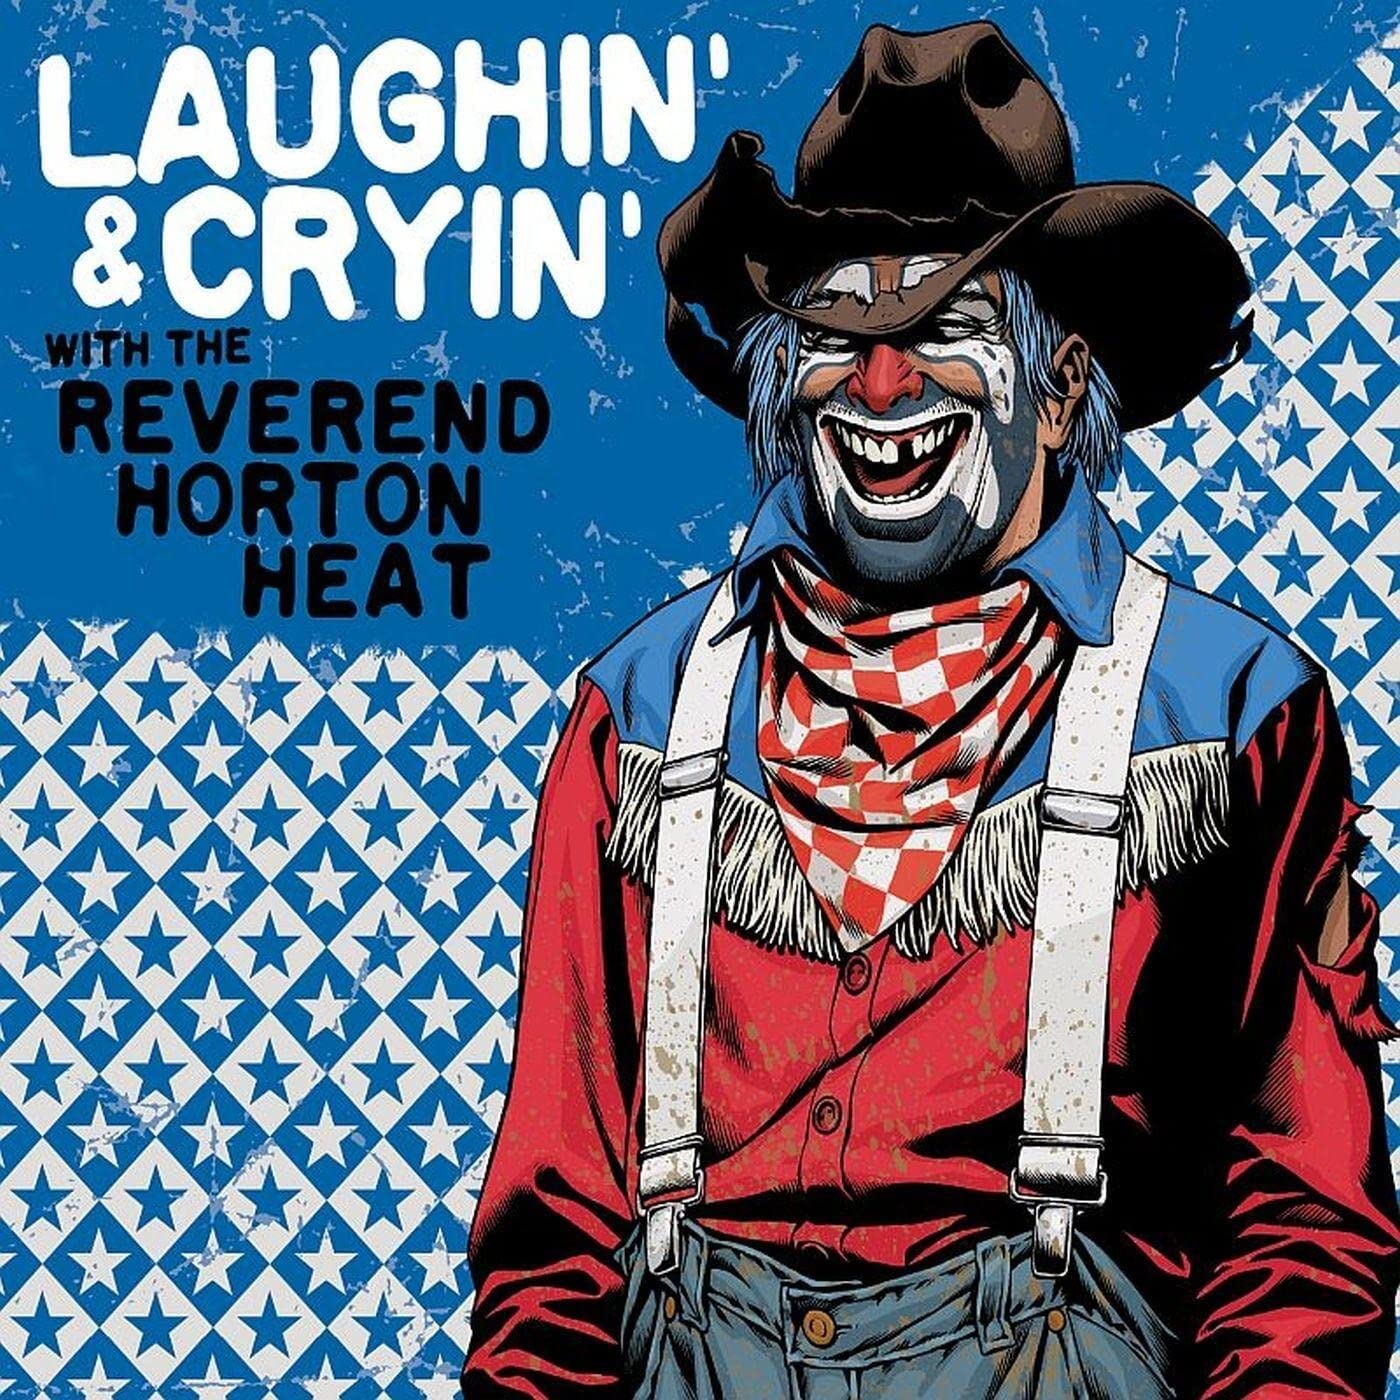 Laughin’ & Cryin’ with The Reverend Horton Heat (Transparent Red Vinyl) on MovieShack